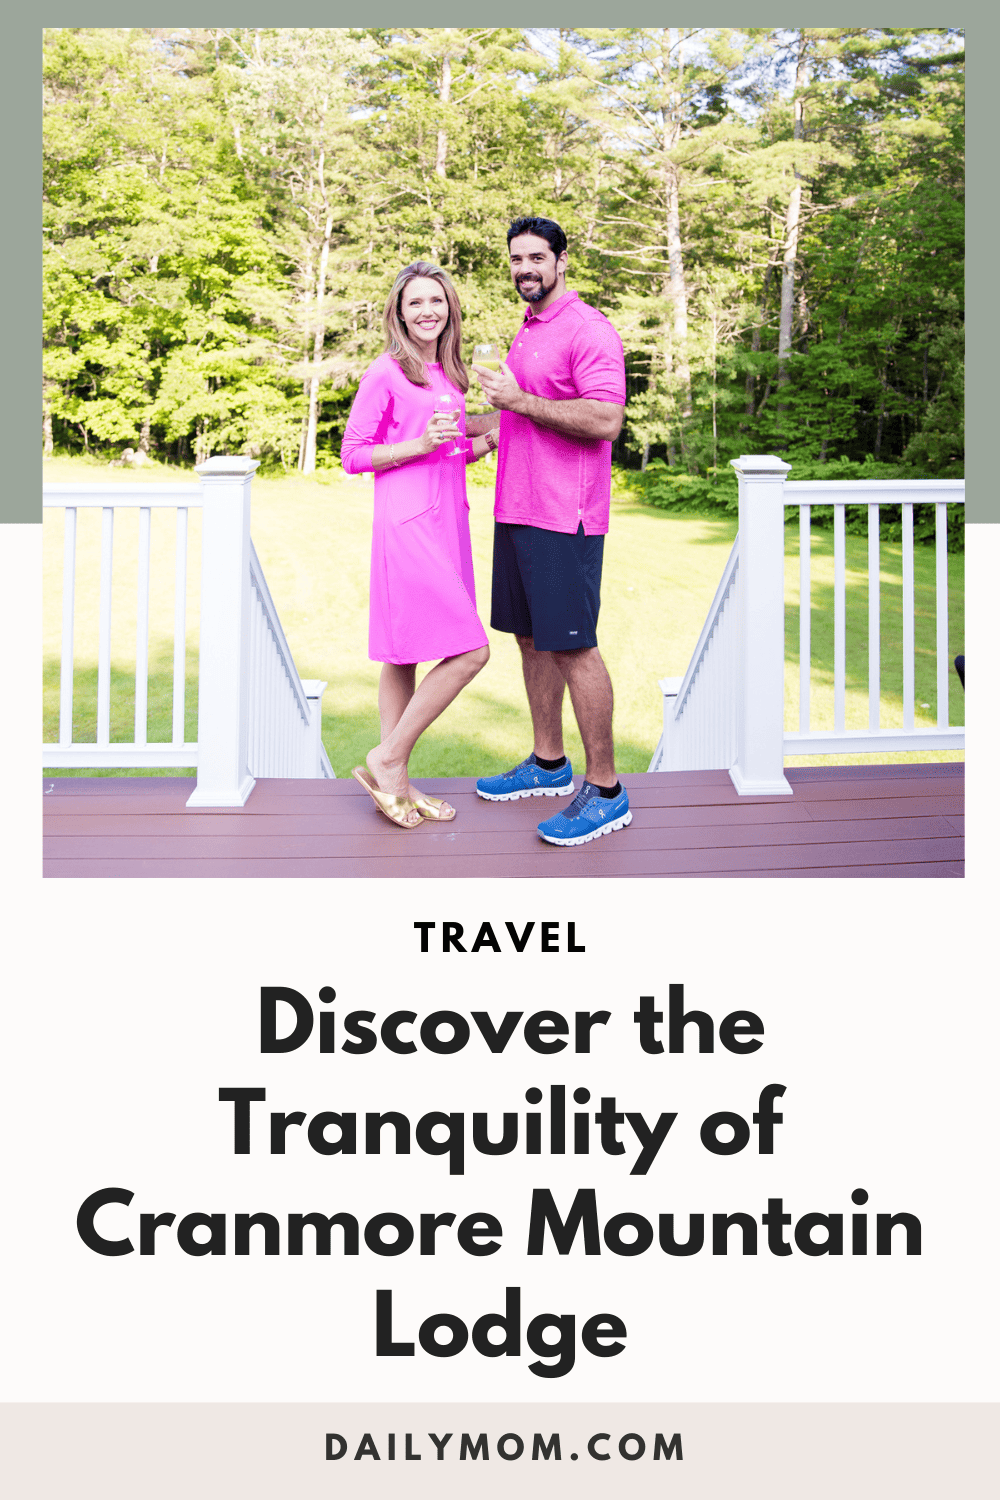 Unwind And Relax: Discover The Tranquility Of Cranmore Mountain Lodge 18 Daily Mom, Magazine For Families